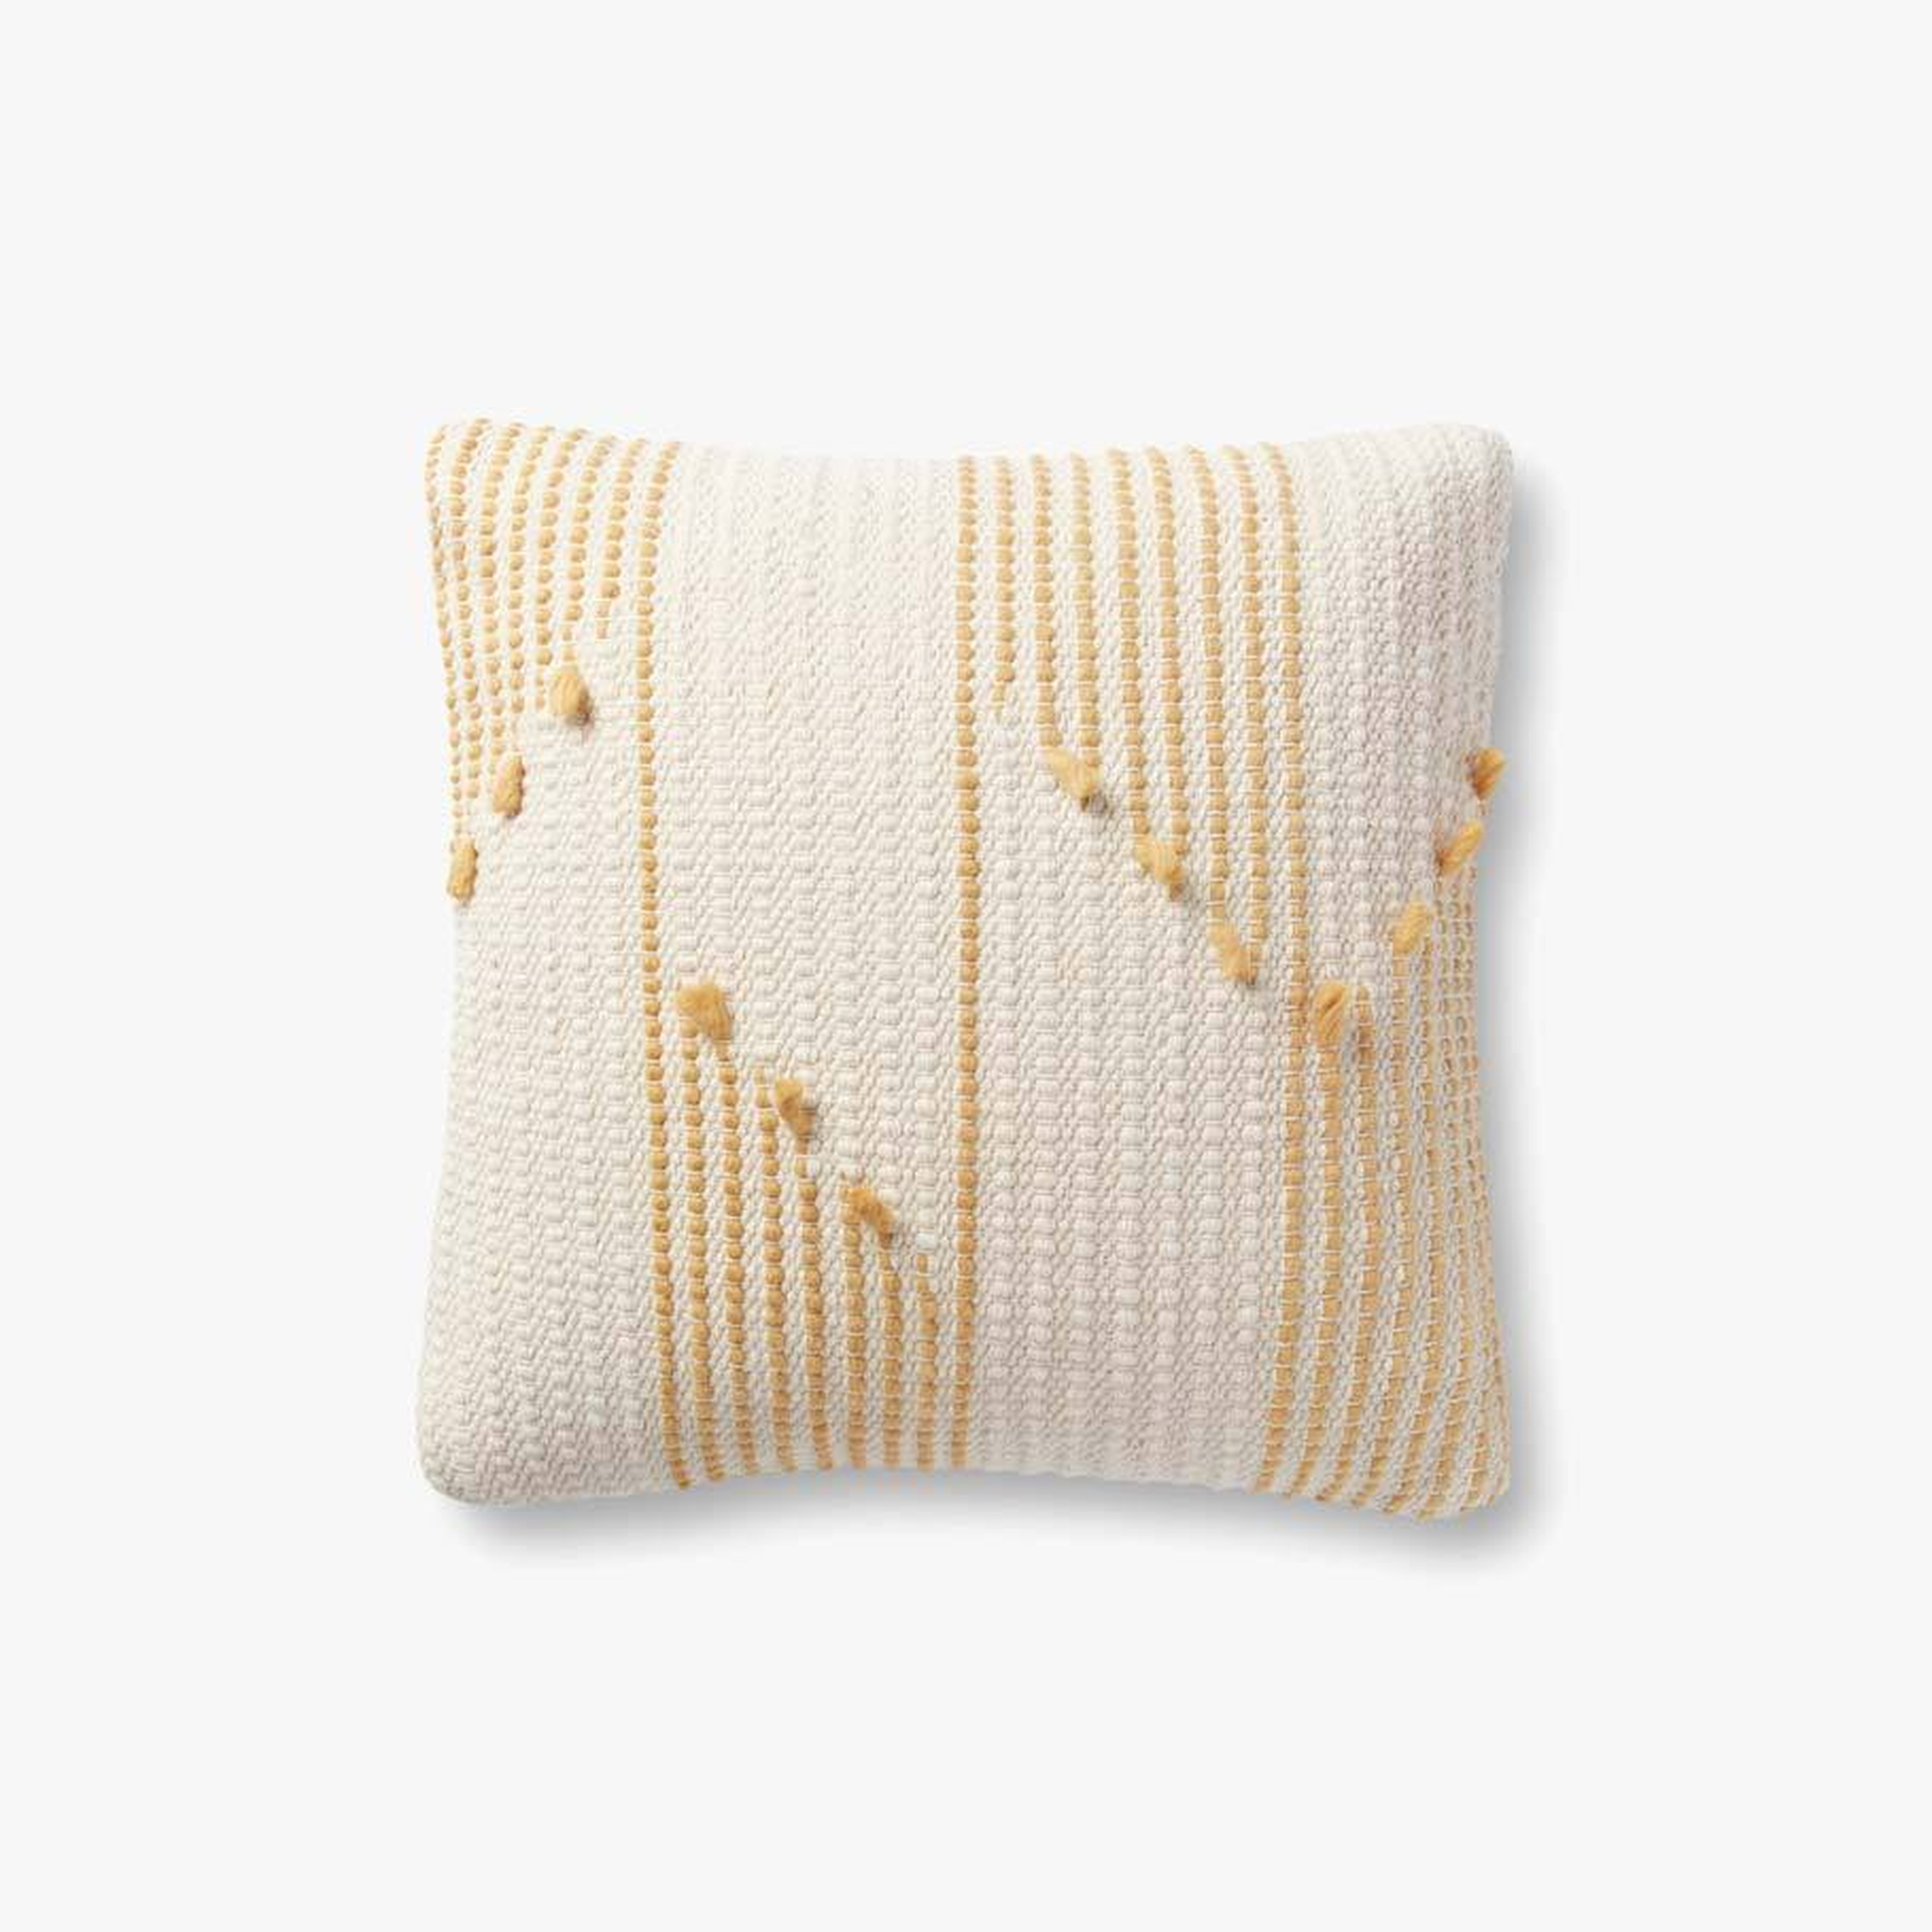 MH Ivory / Gold Pillow with Poly Insert - Magnolia Home by Joana Gaines Crafted by Loloi Rugs